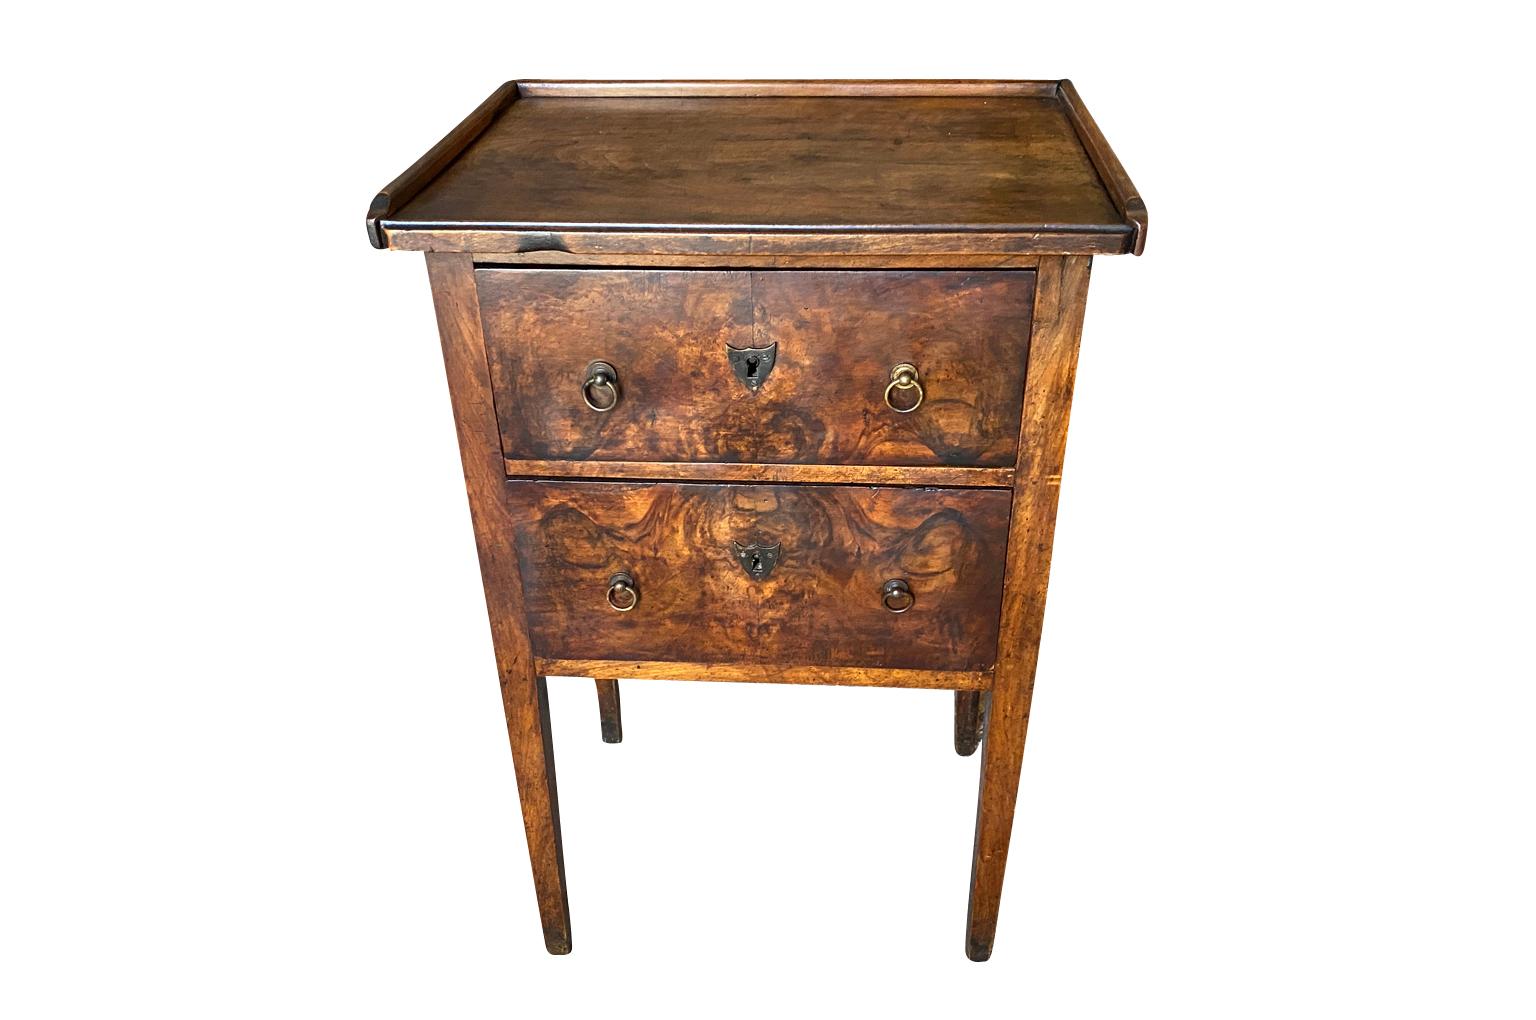 A very beautiful early 19th century Directoire period Side Table from the South of France. Wonderfully constructed from handsome walnut with 2 drawers raised on tapered legs. Gorgeous graining and patina.